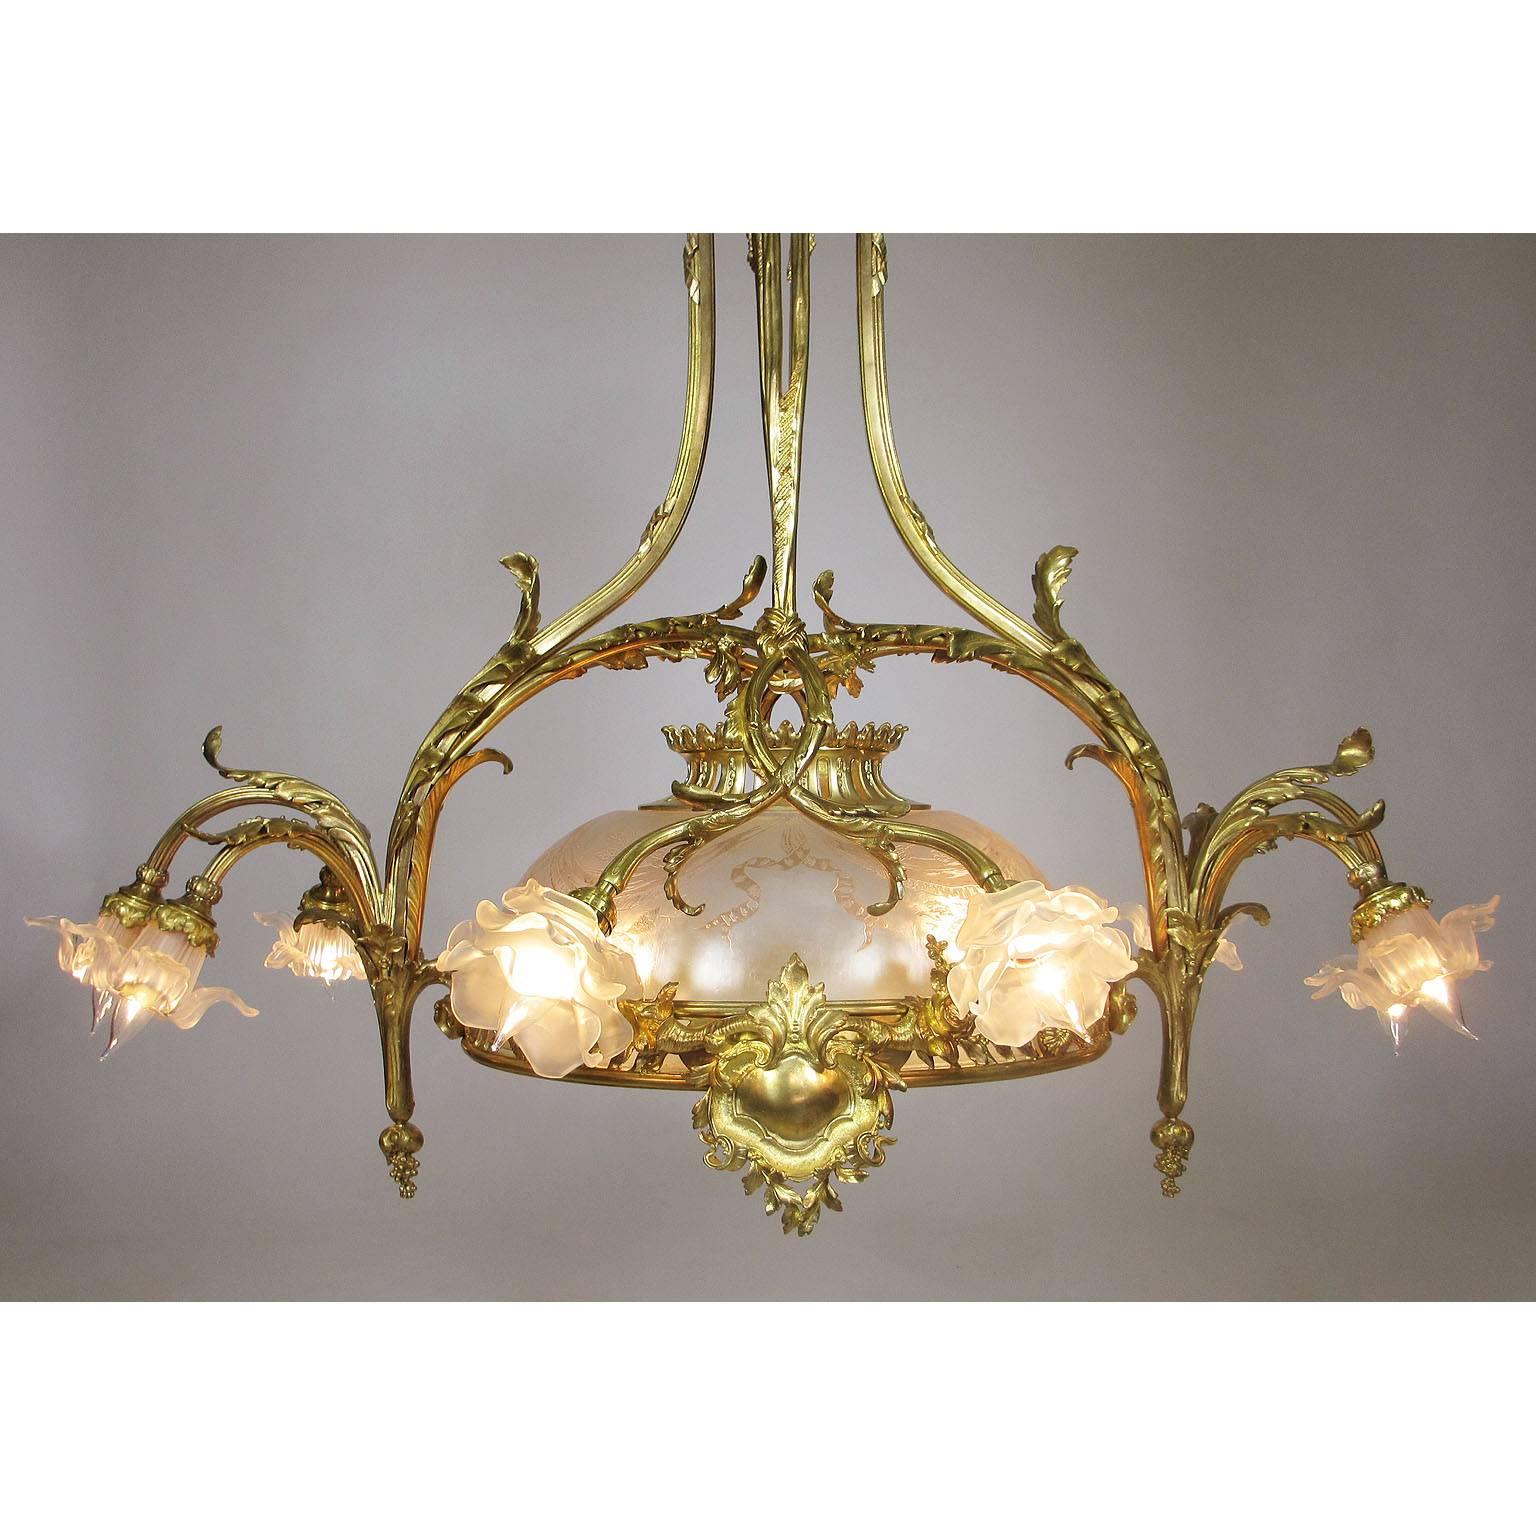 A fine French 19th-20th century Belle Époque gilt bronze and frosted molded glass 